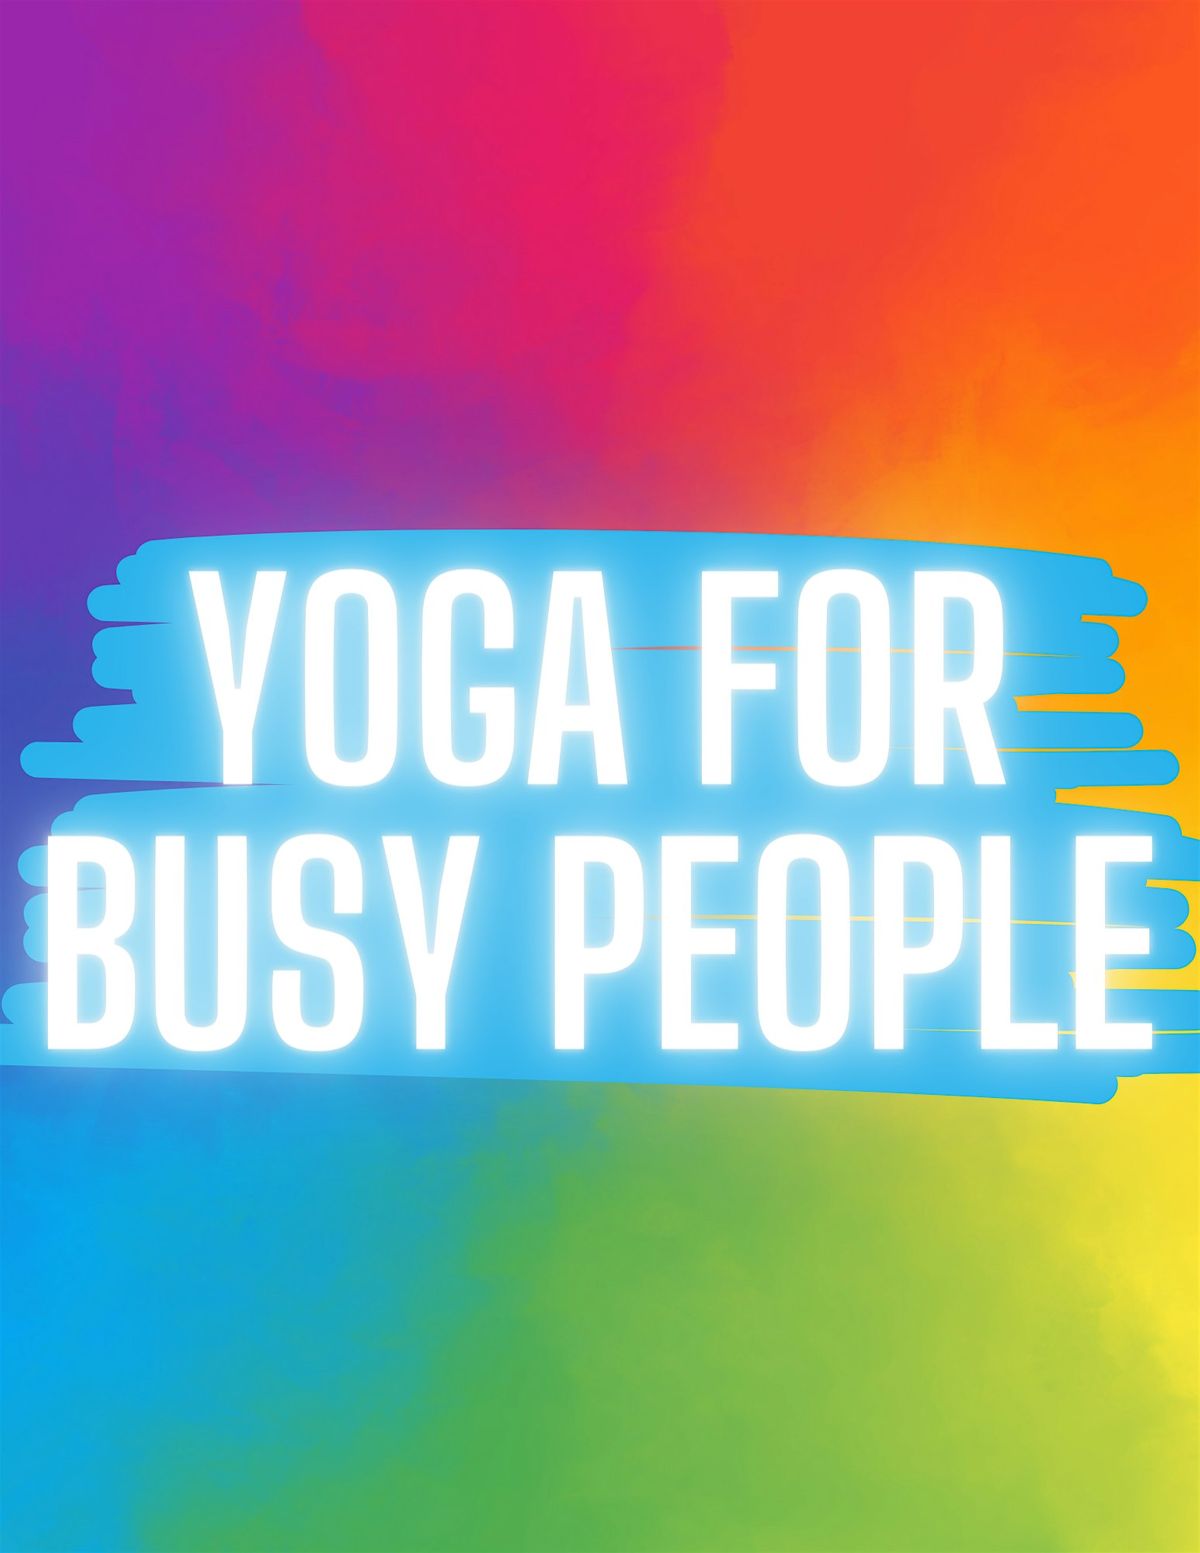 Yoga for Busy People - Weekly Yoga Class - Tampa